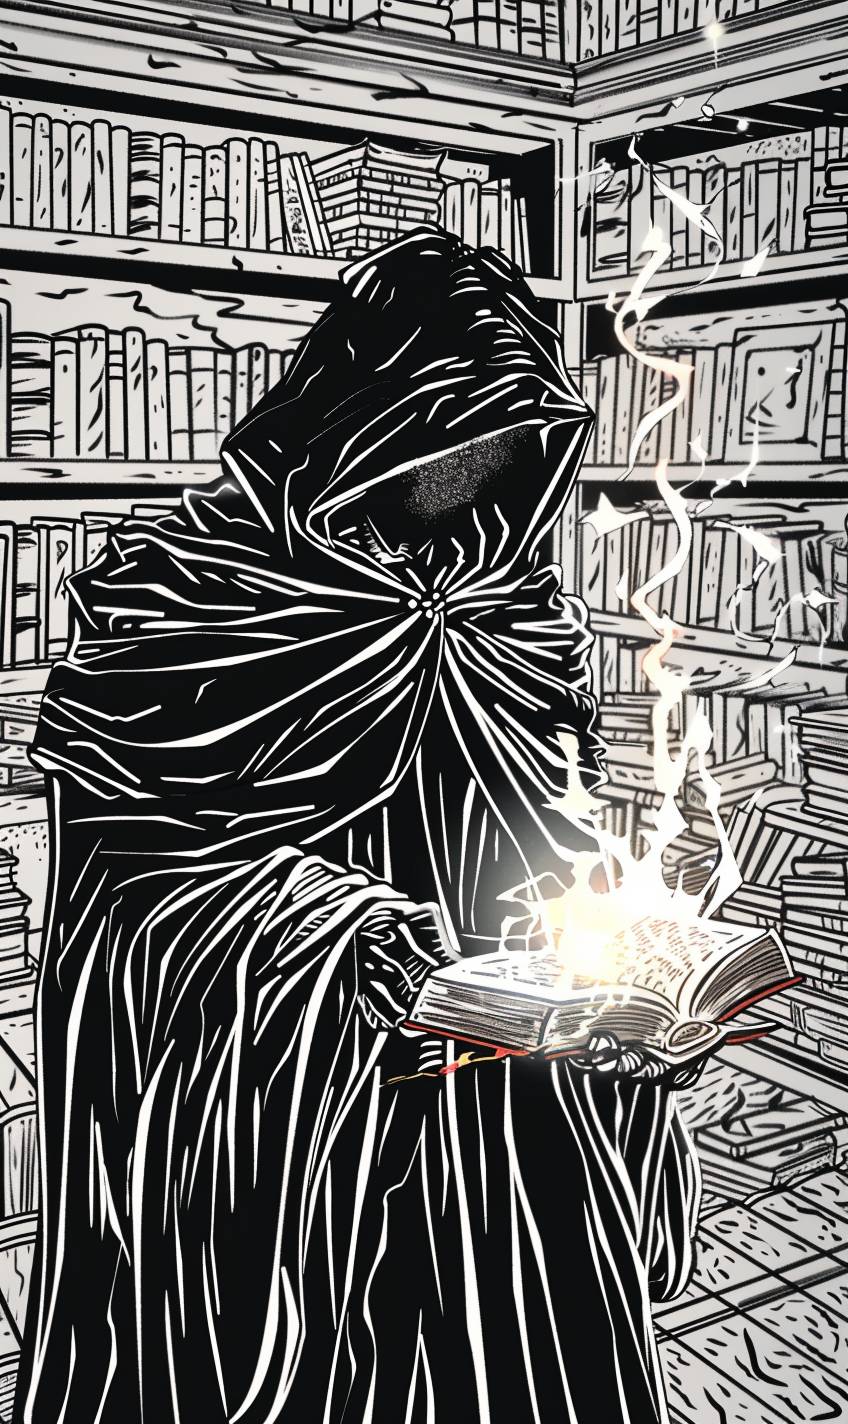 A mysterious sorcerer casting a powerful spell in a dark, ancient library filled with arcane books and mystical artifacts